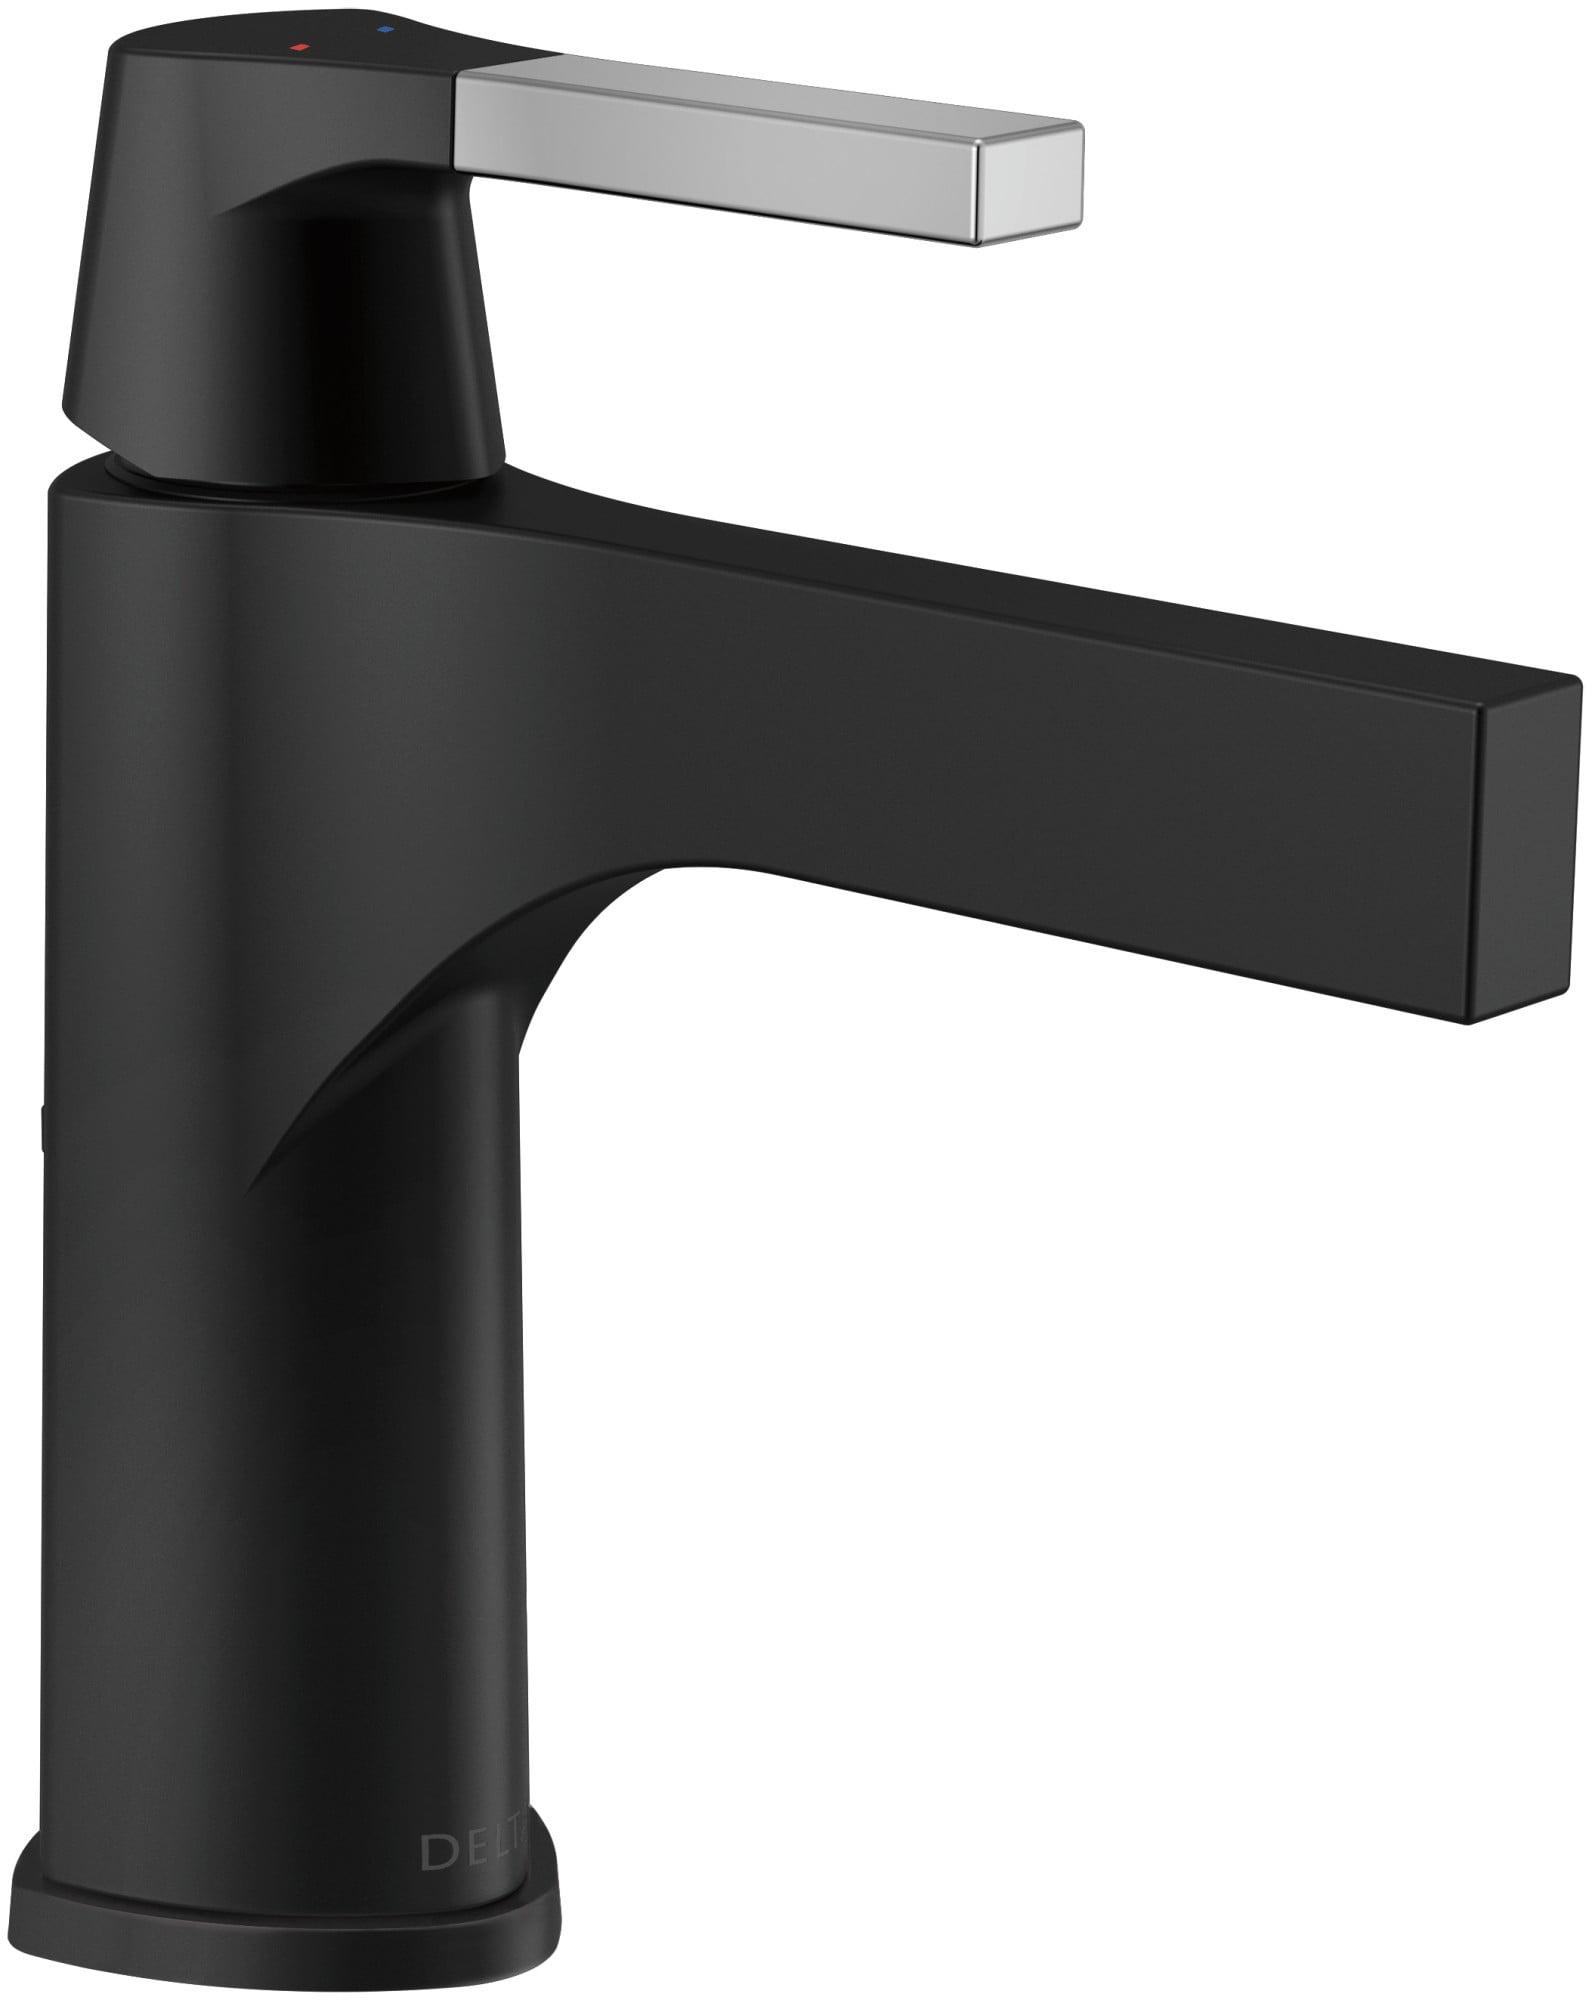 Modern Chrome Brass 7.5" Single Hole Faucet with Drain Assembly